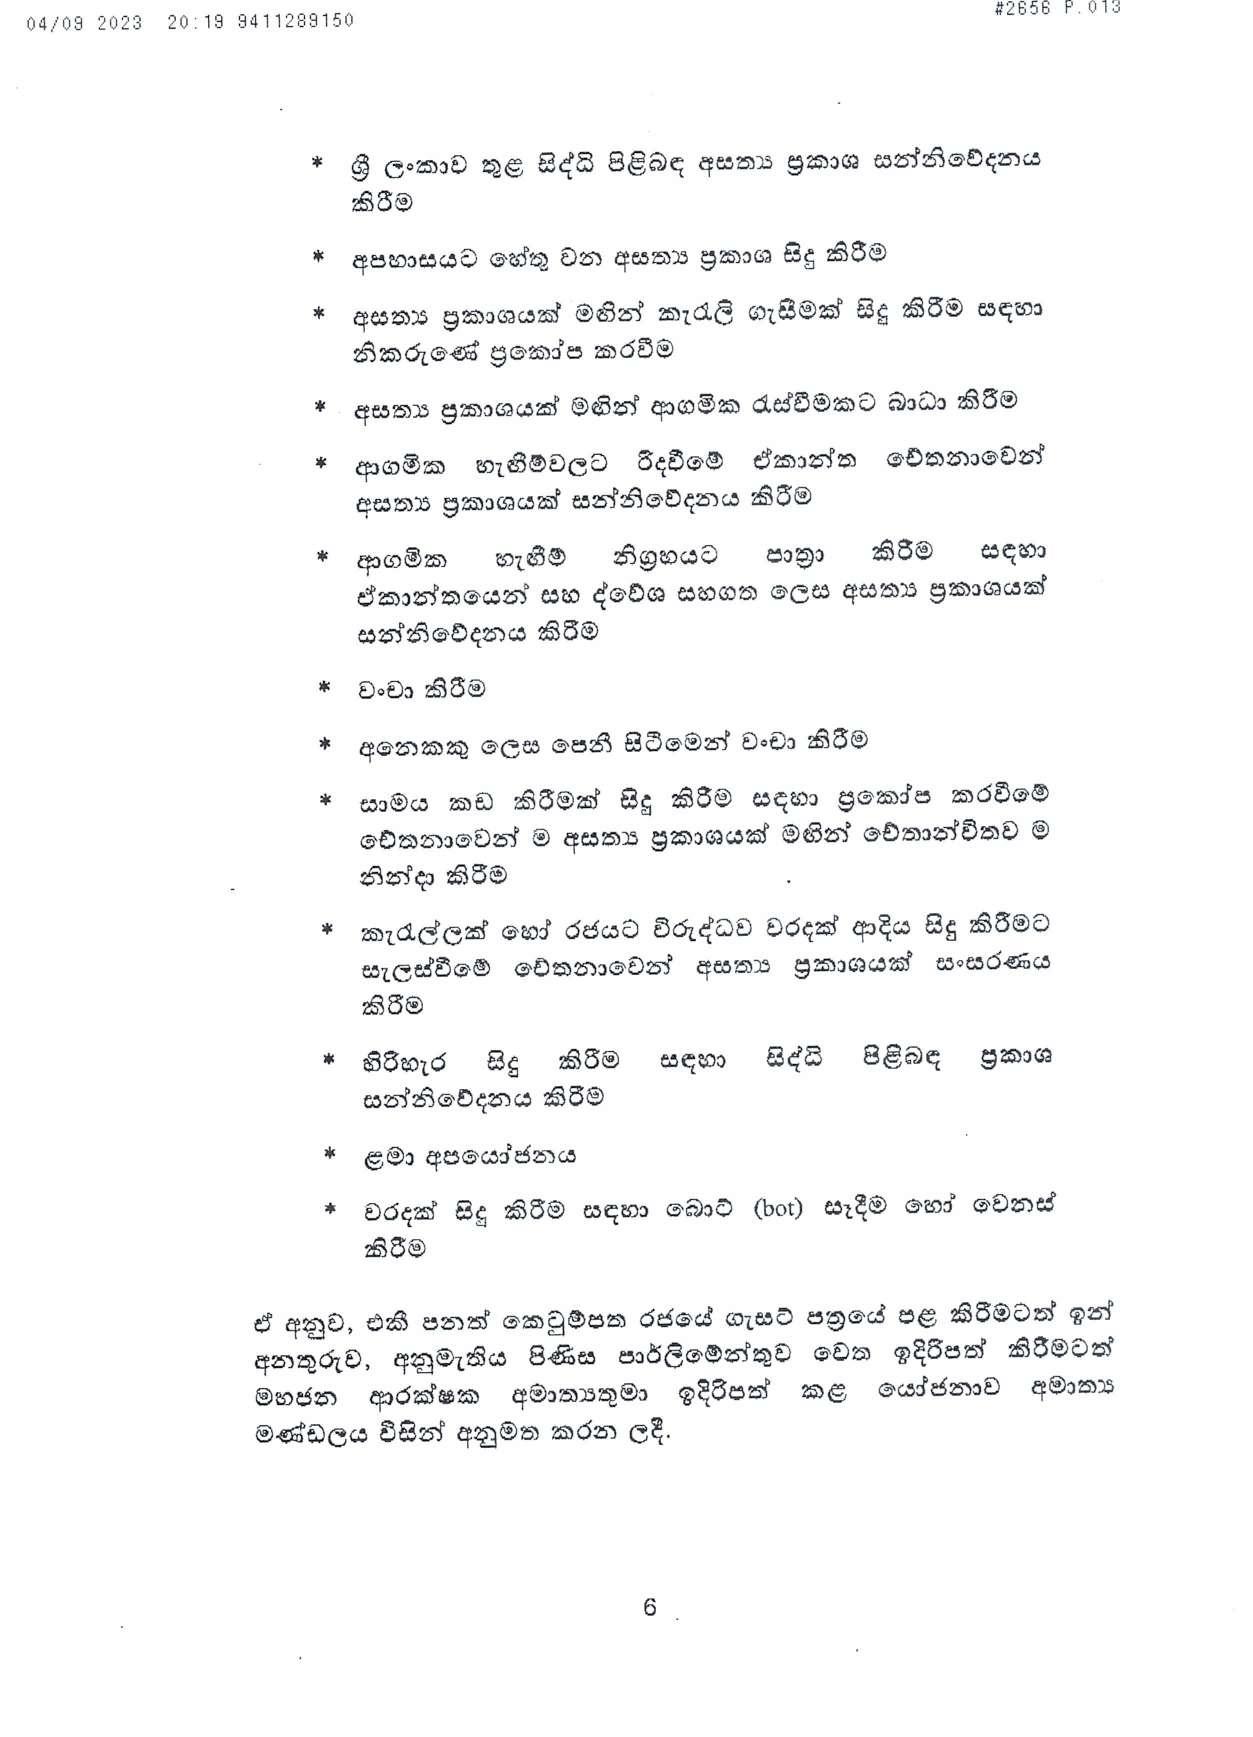 Cabinet Decision on 04.09.2023 page 006